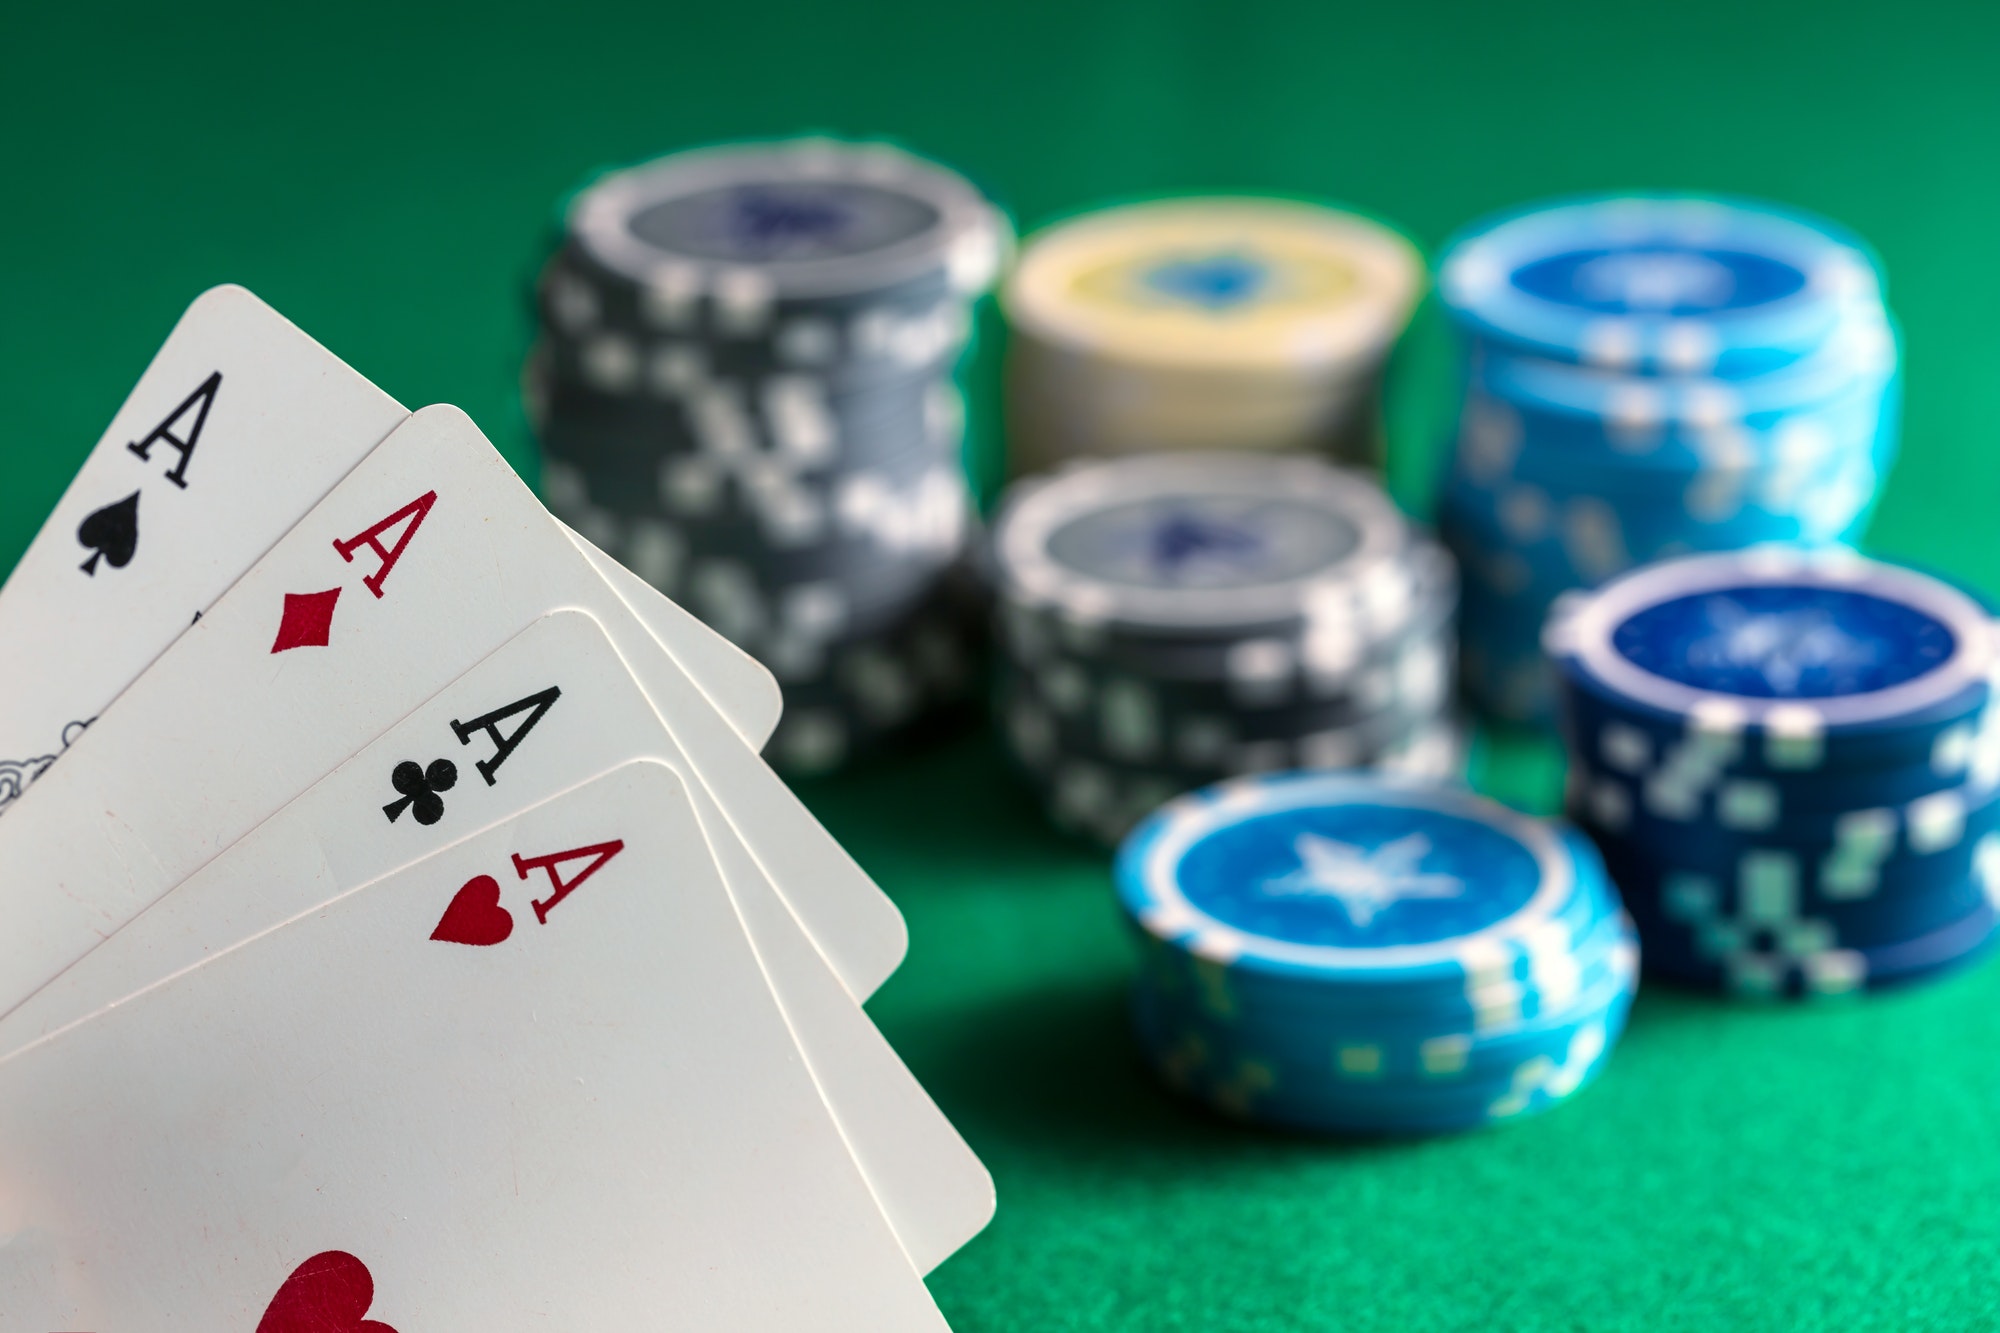 Get familiar with different aspects of the online poker sites